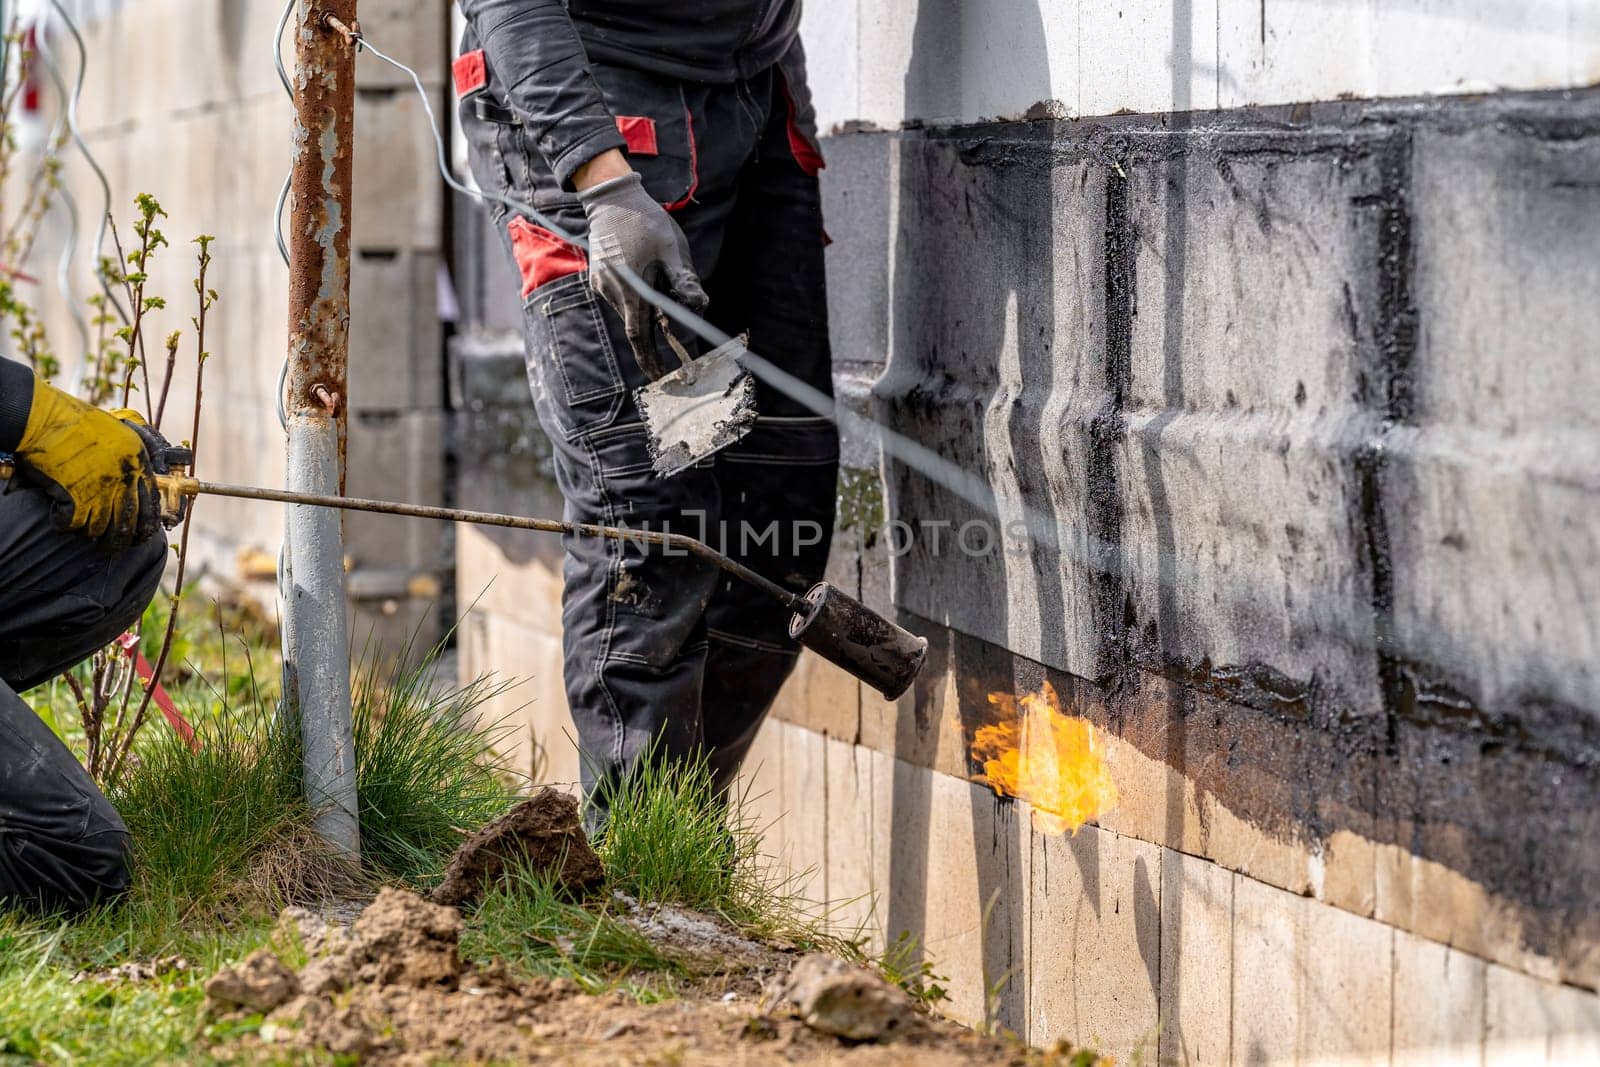 installation of protective waterproofing on the foundation and walls of the building. warmed by an open fire by Edophoto